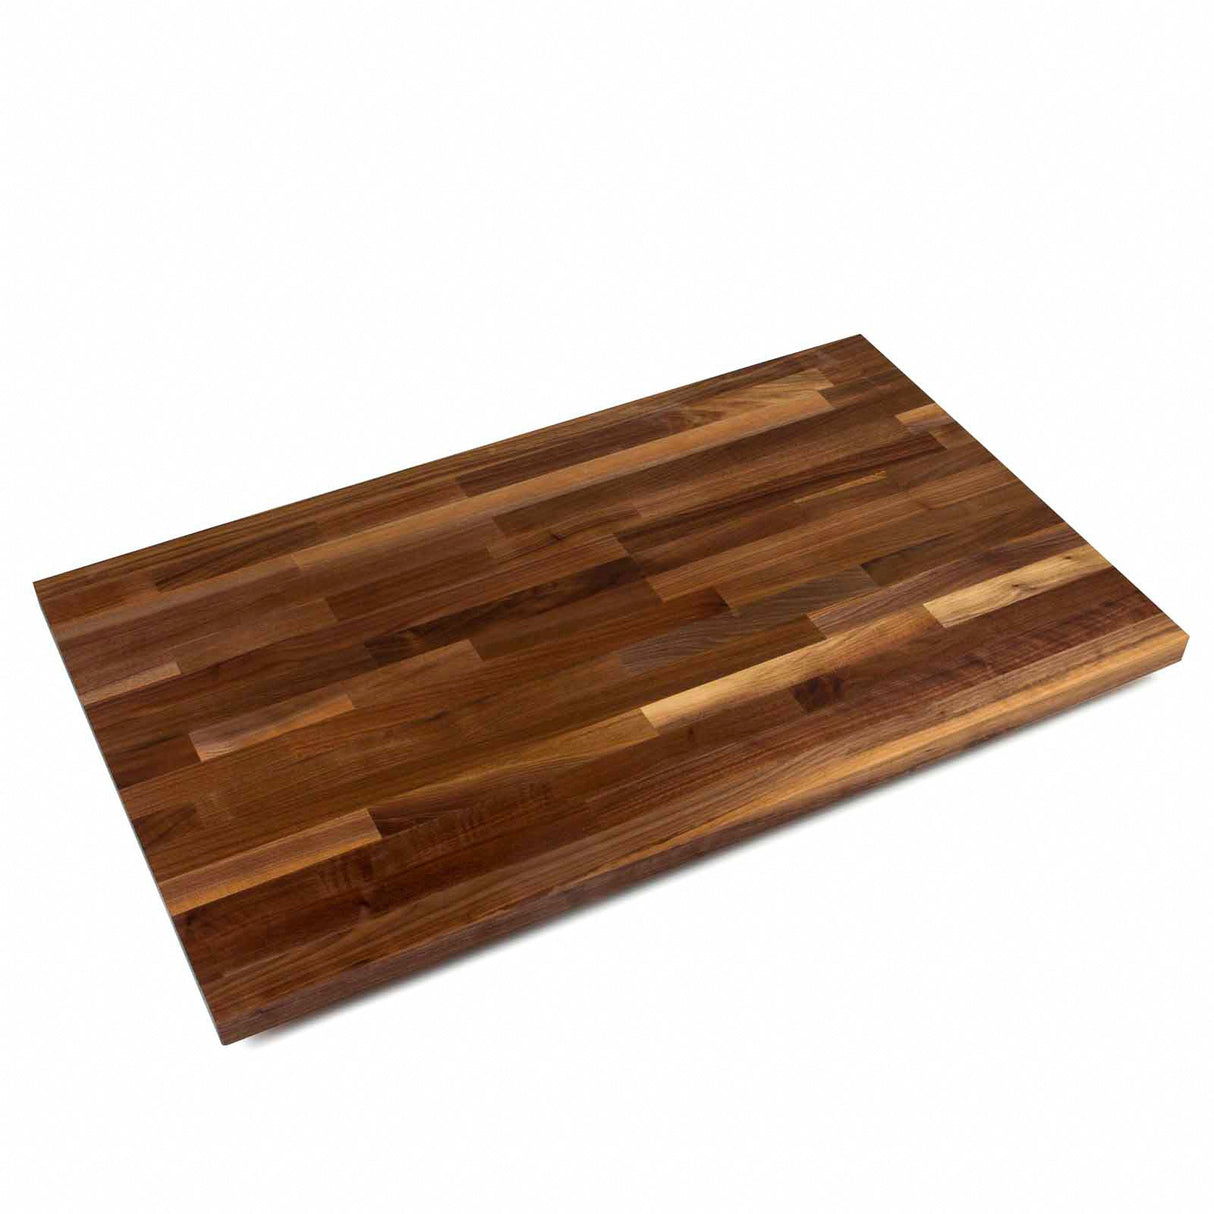 John Boos WALKCT-BL7236-O Blended Walnut Island Top with Oil Finish, 1.5" Thickness, 72" x 36"